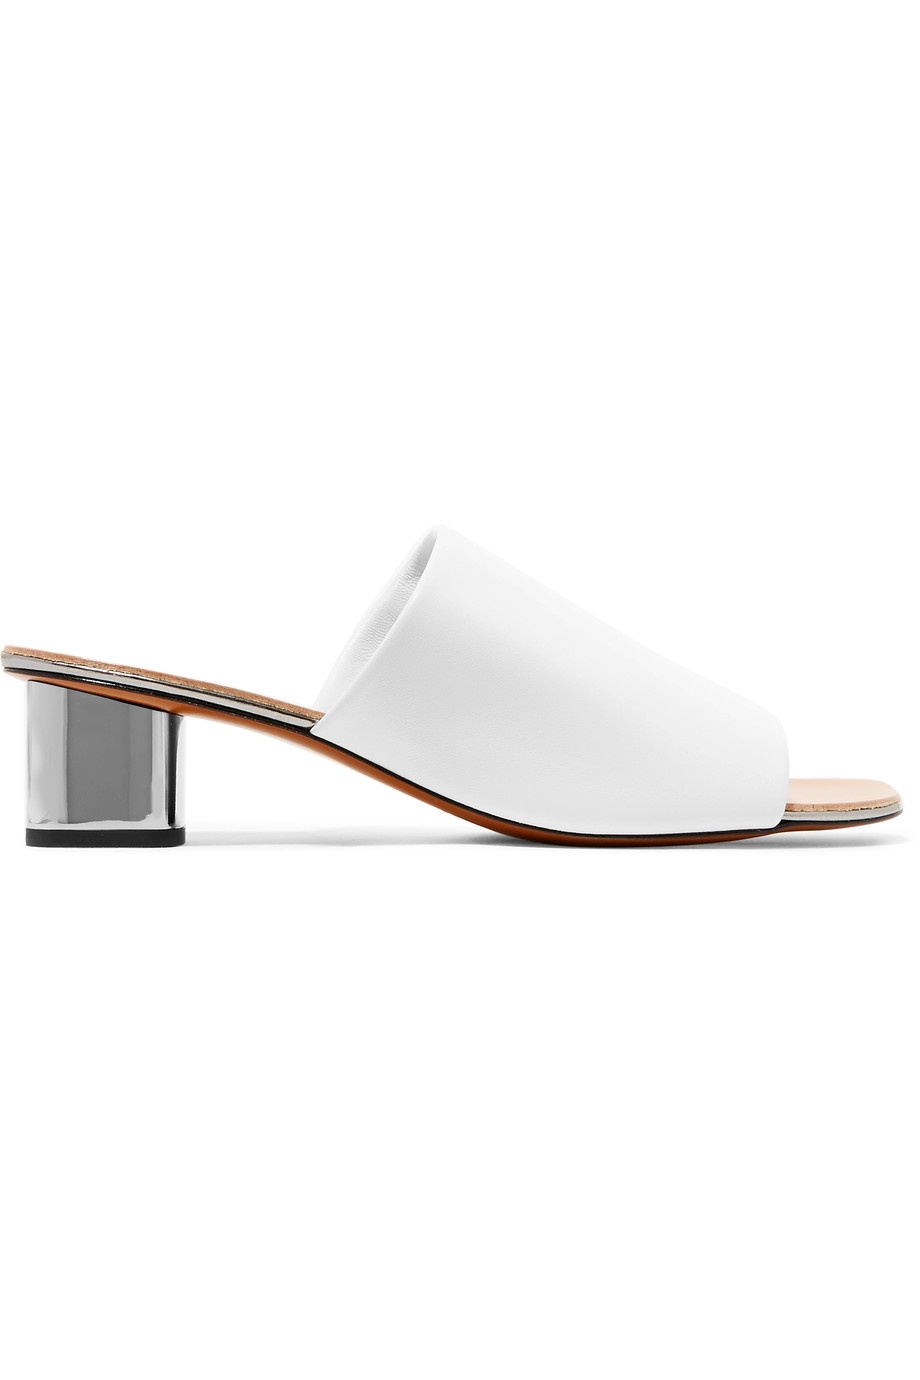 ROBERT CLERGERIE Lato leather mules